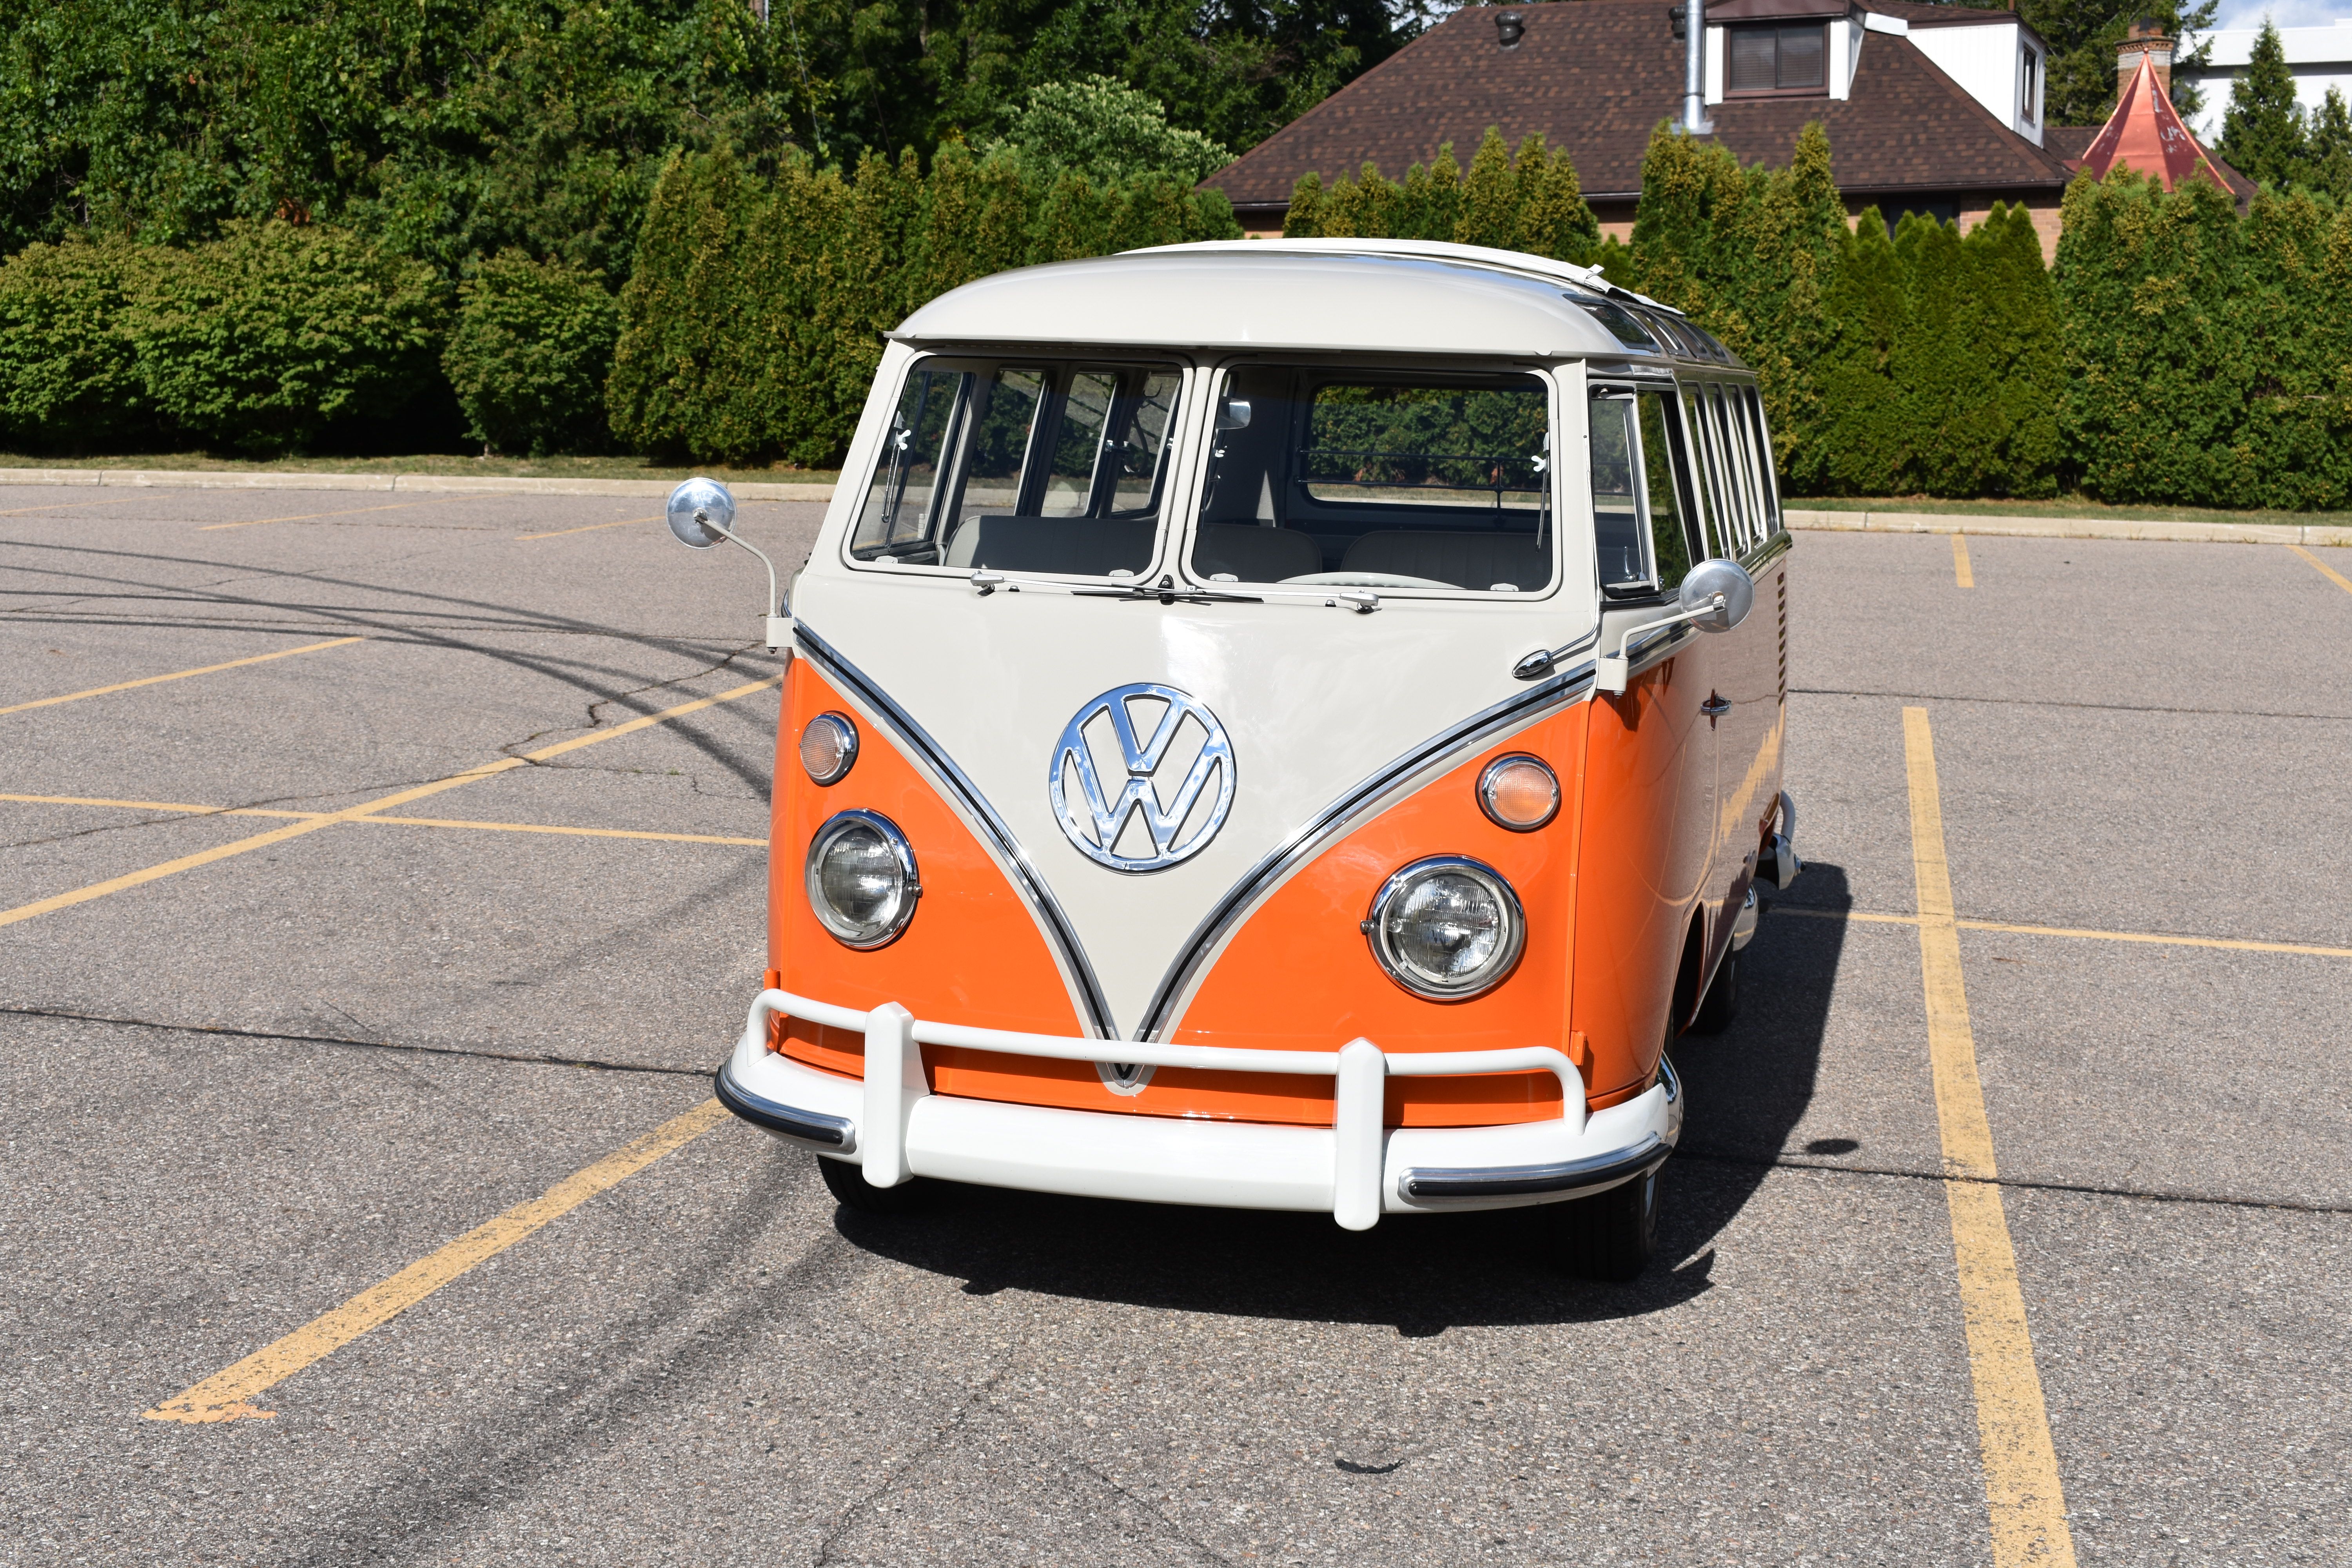 5 Things Know About Driving an Old Volkswagen